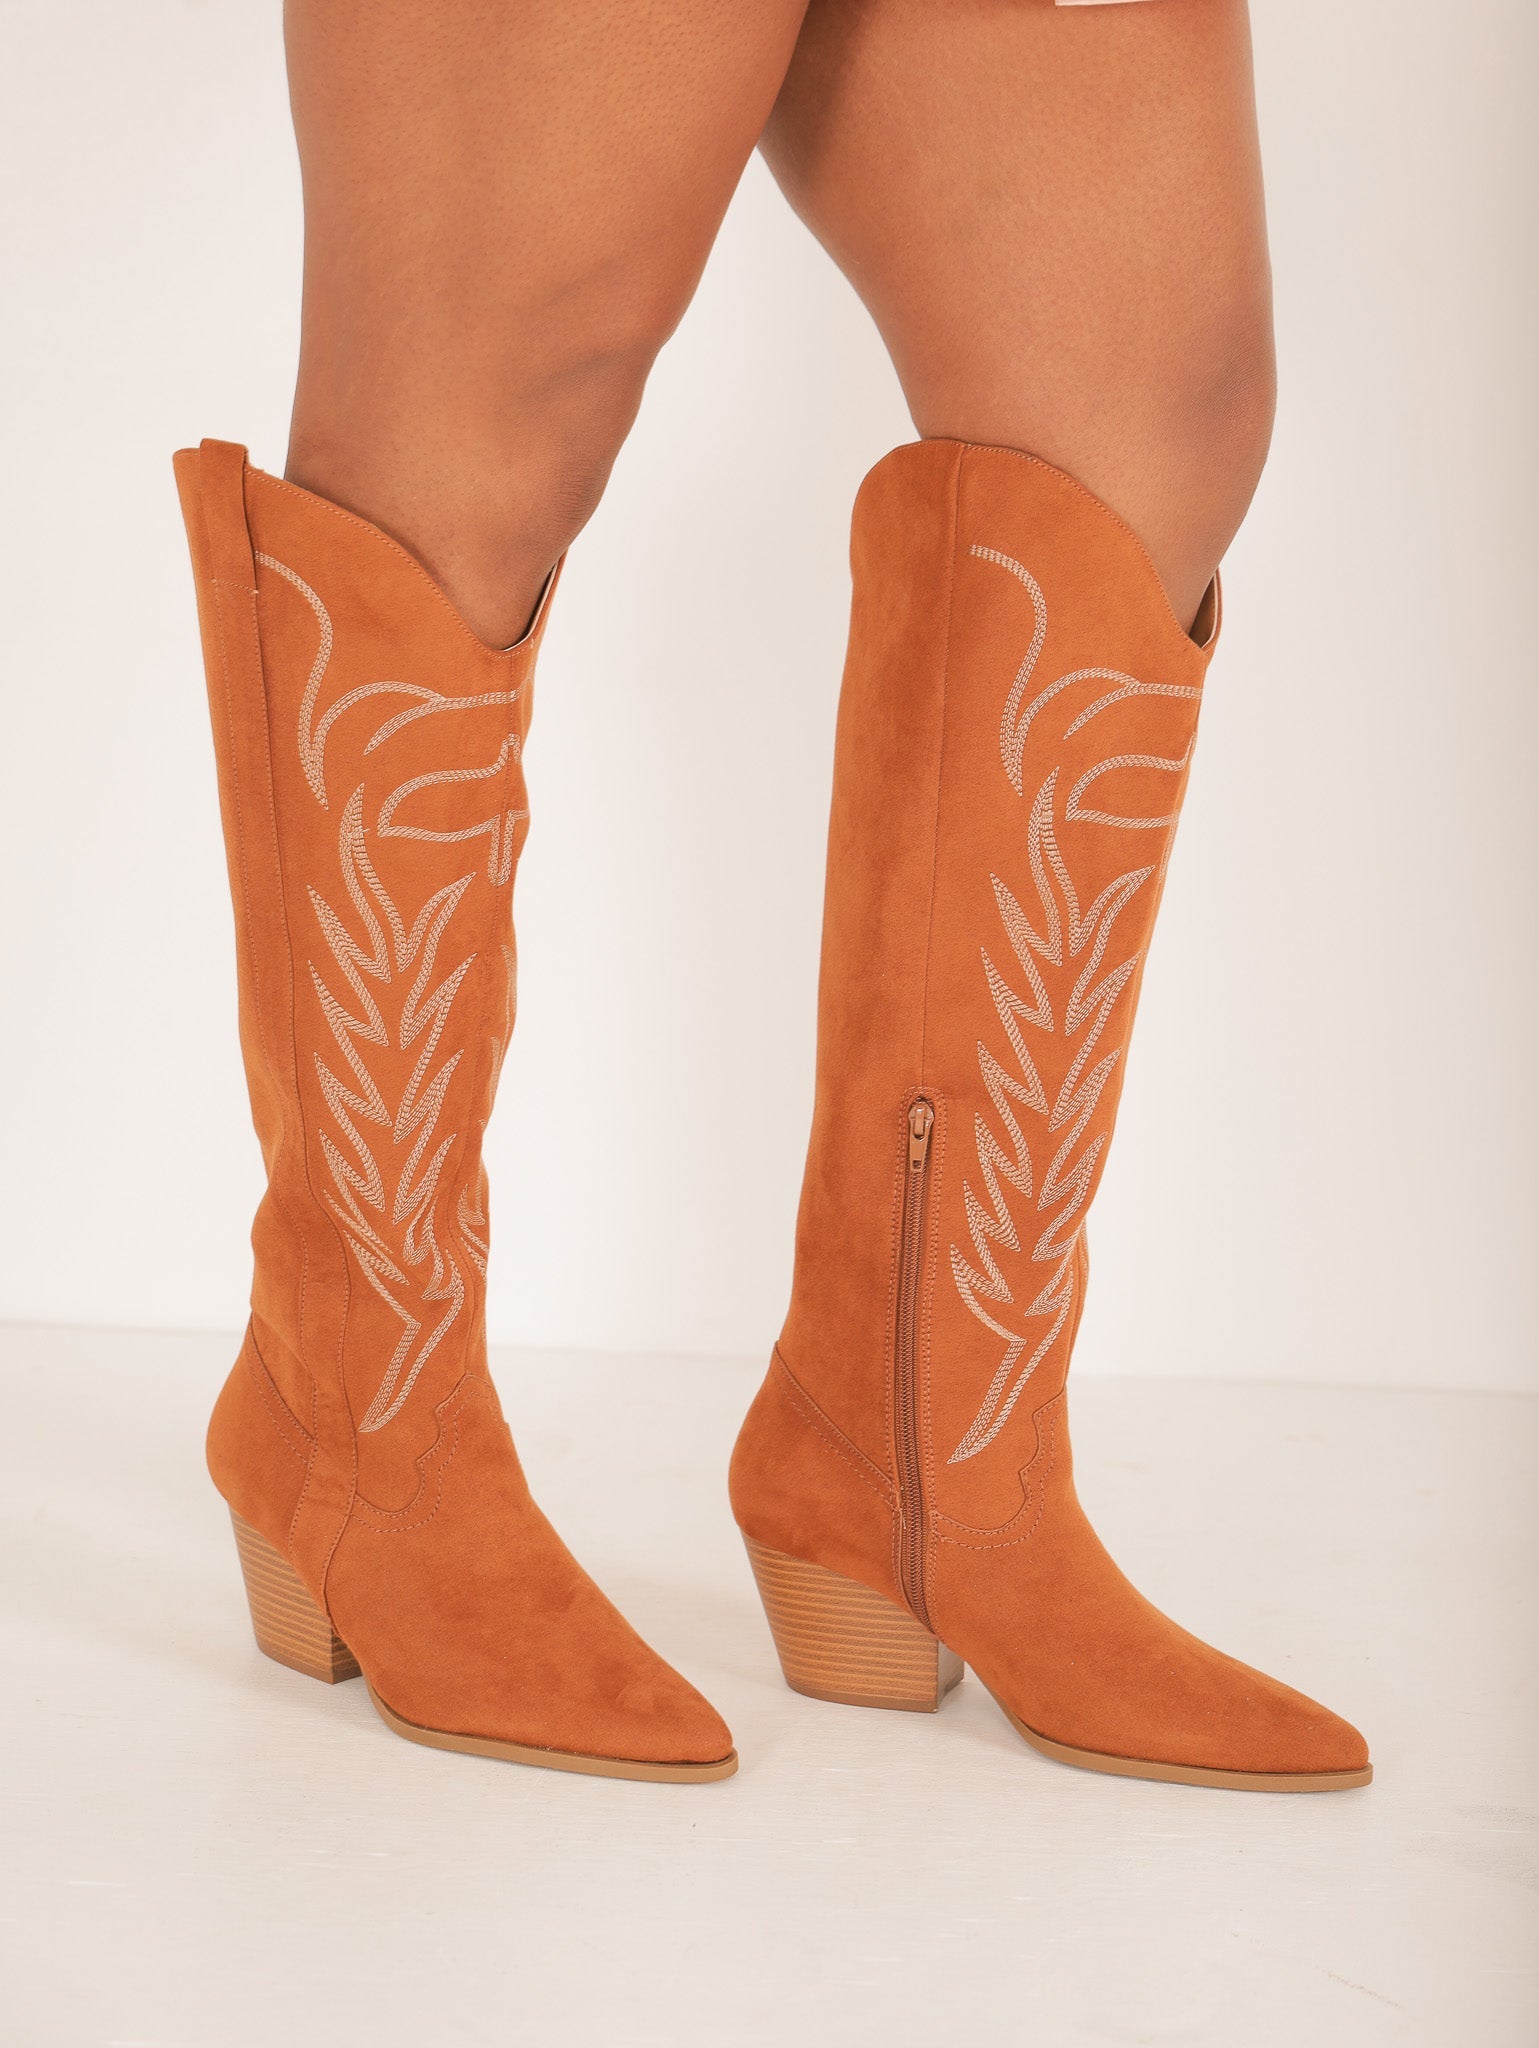 Molly Green - Bourbon Street Boots - Shoes